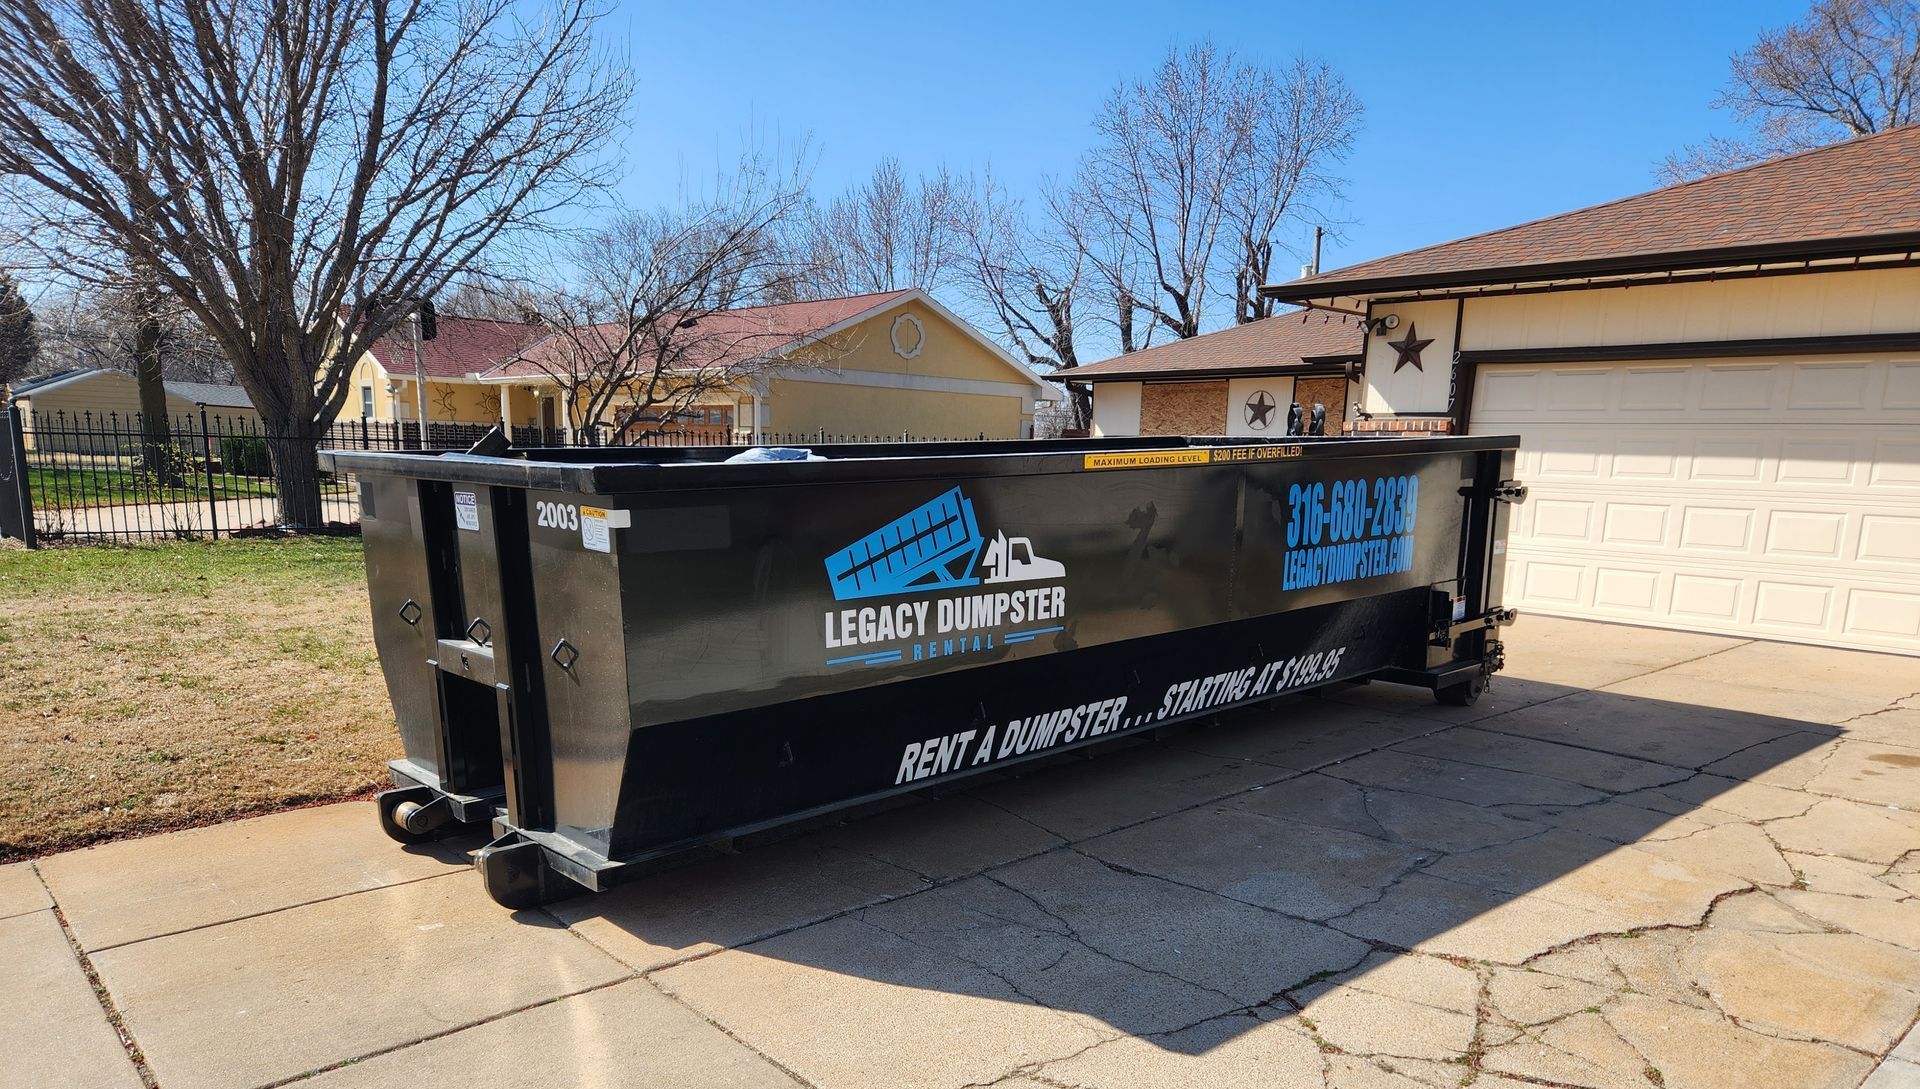 A 20 yard dumpster is parked in front of a house.